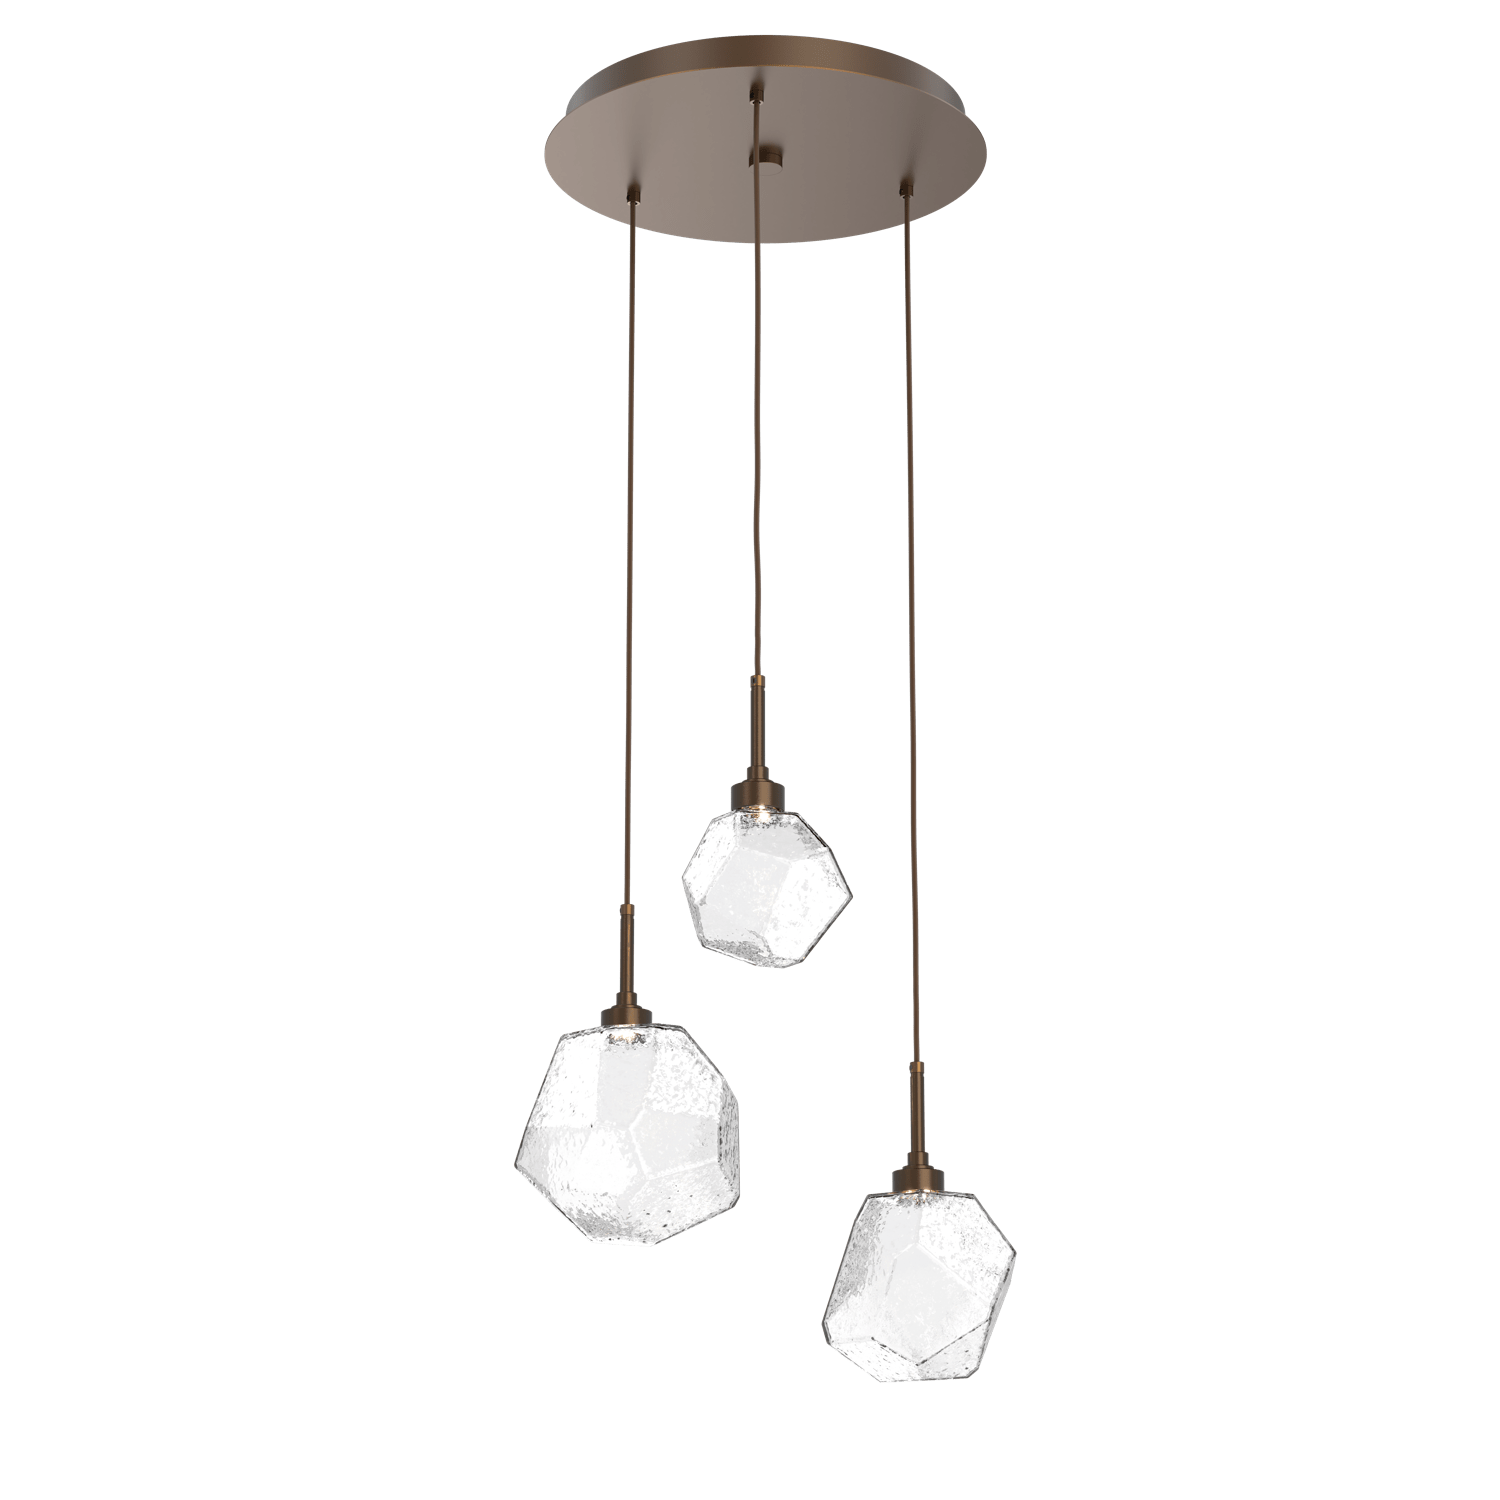 CHB0039-03-FB-C-Hammerton-Studio-Gem-3-light-round-pendant-chandelier-with-flat-bronze-finish-and-clear-blown-glass-shades-and-LED-lamping